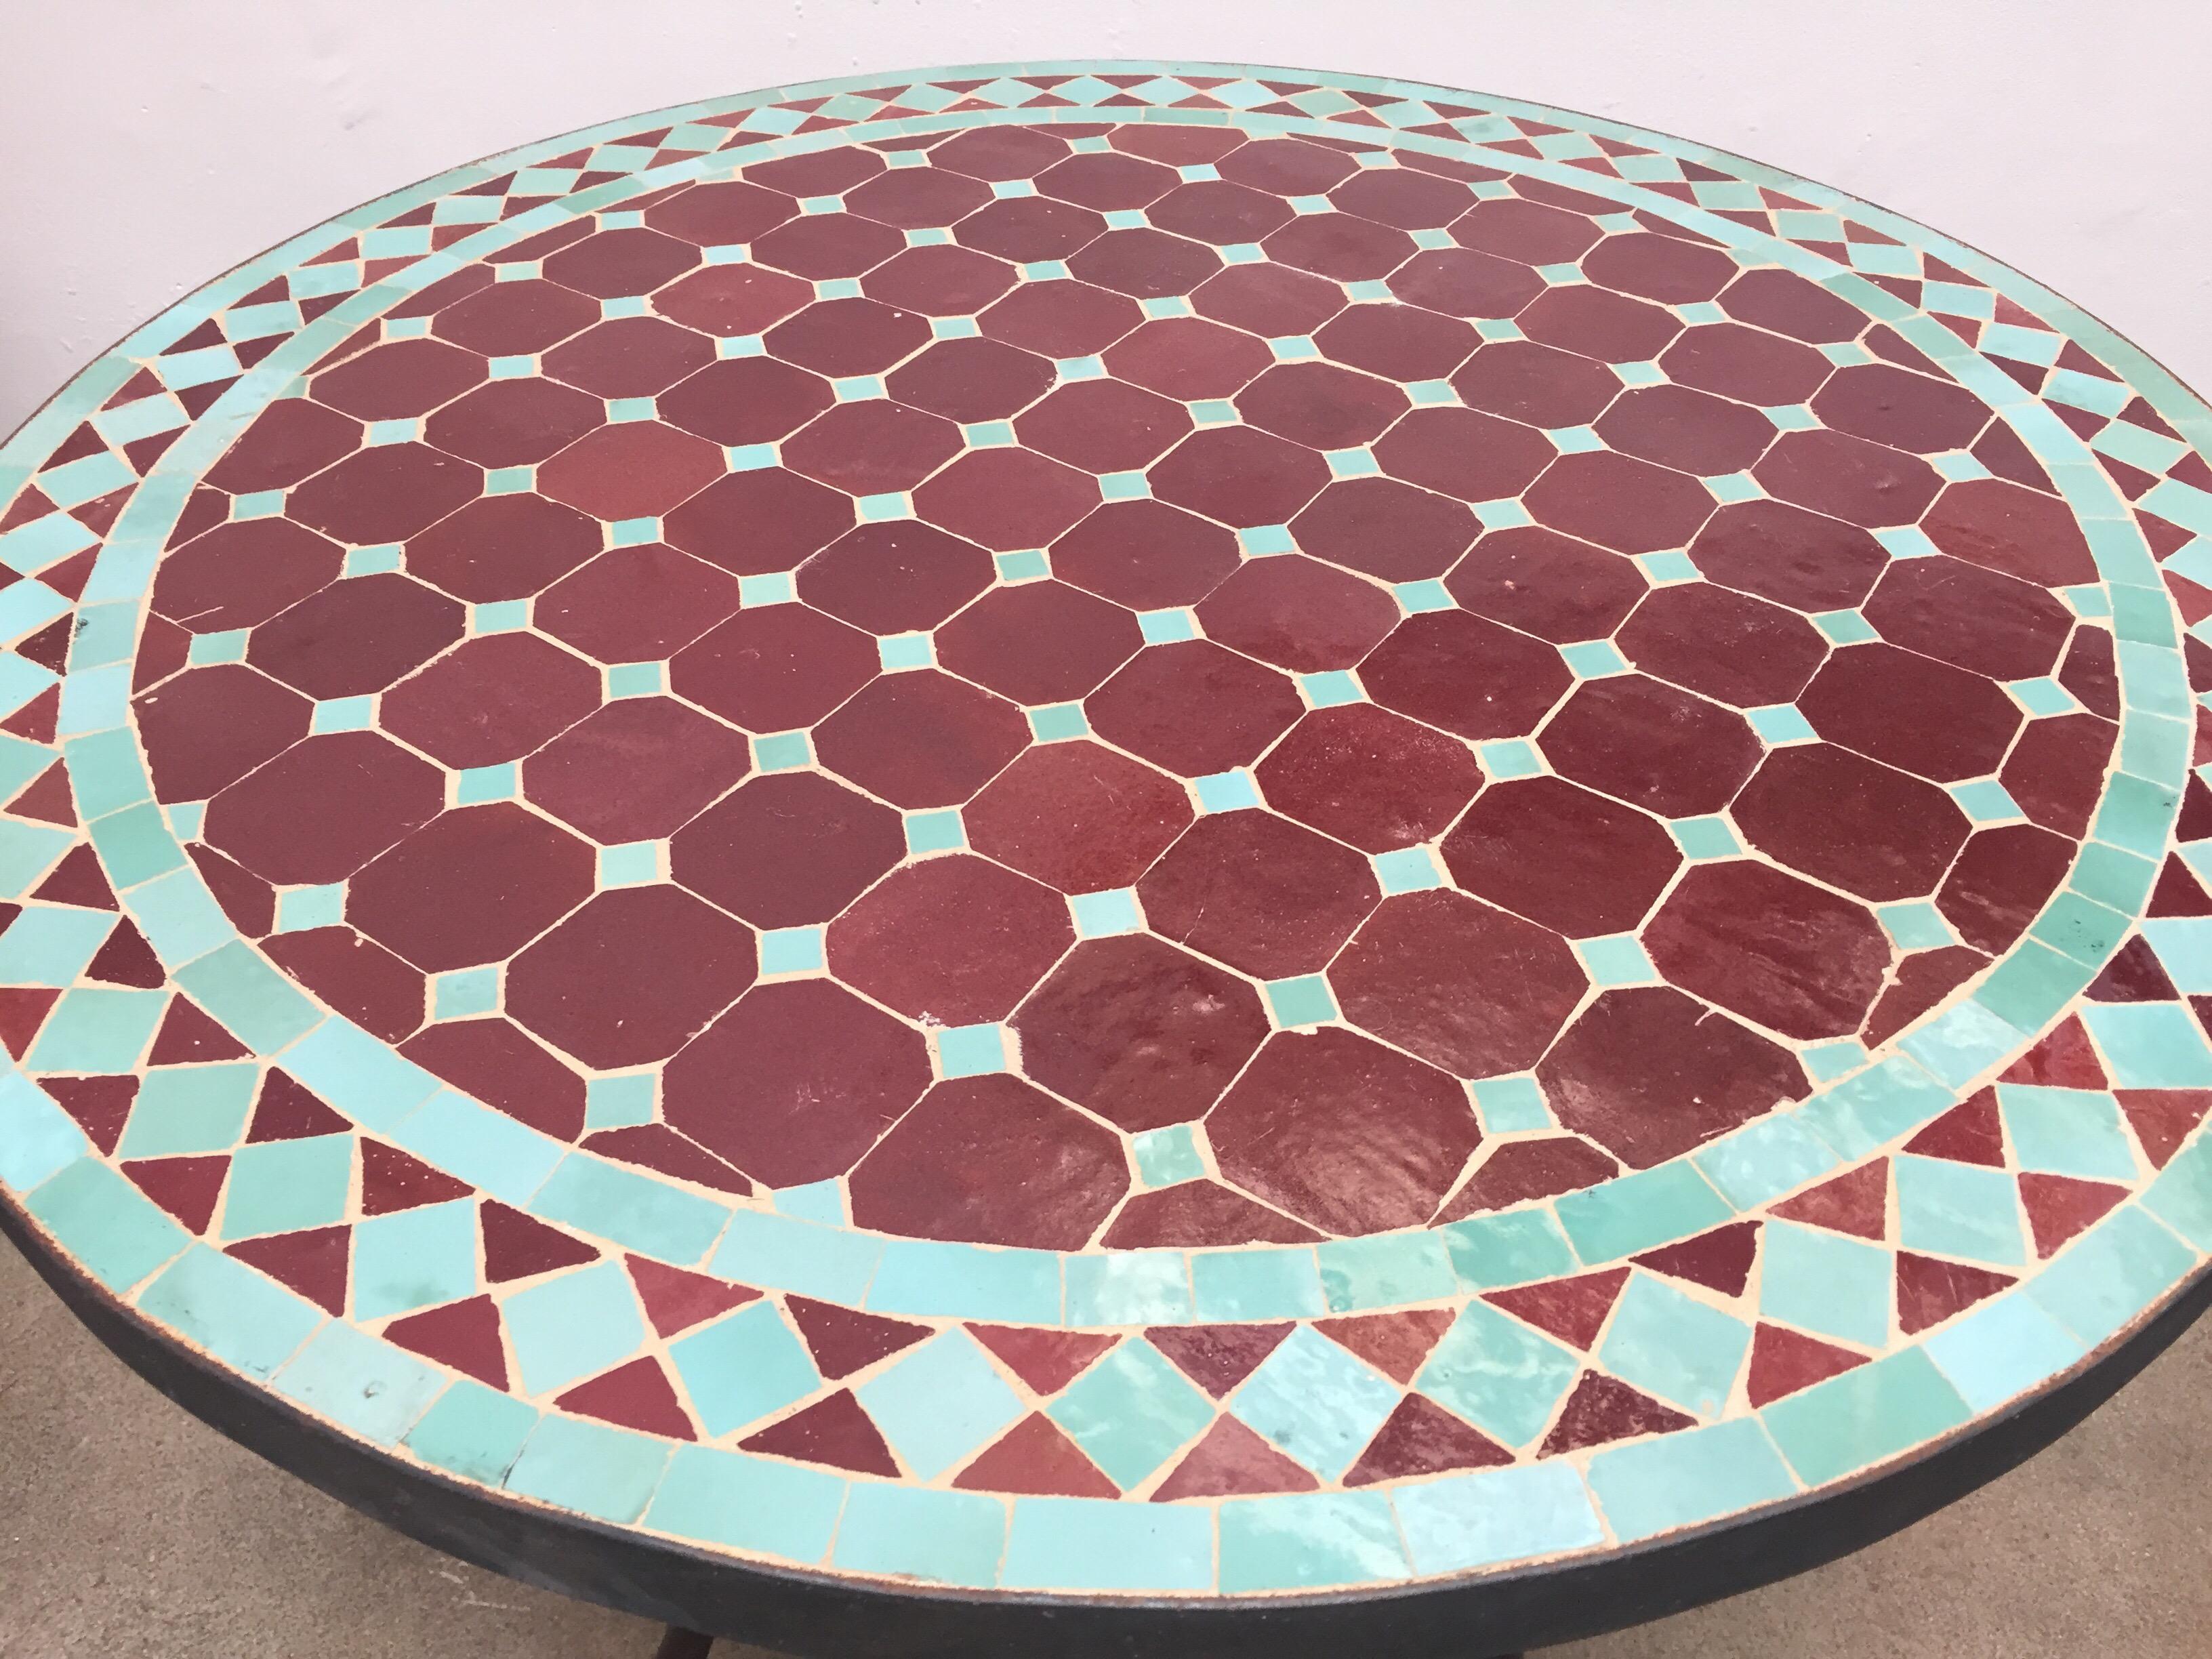 20th Century Moroccan Round Mosaic Tile Bistro Table Indoor or Outdoor